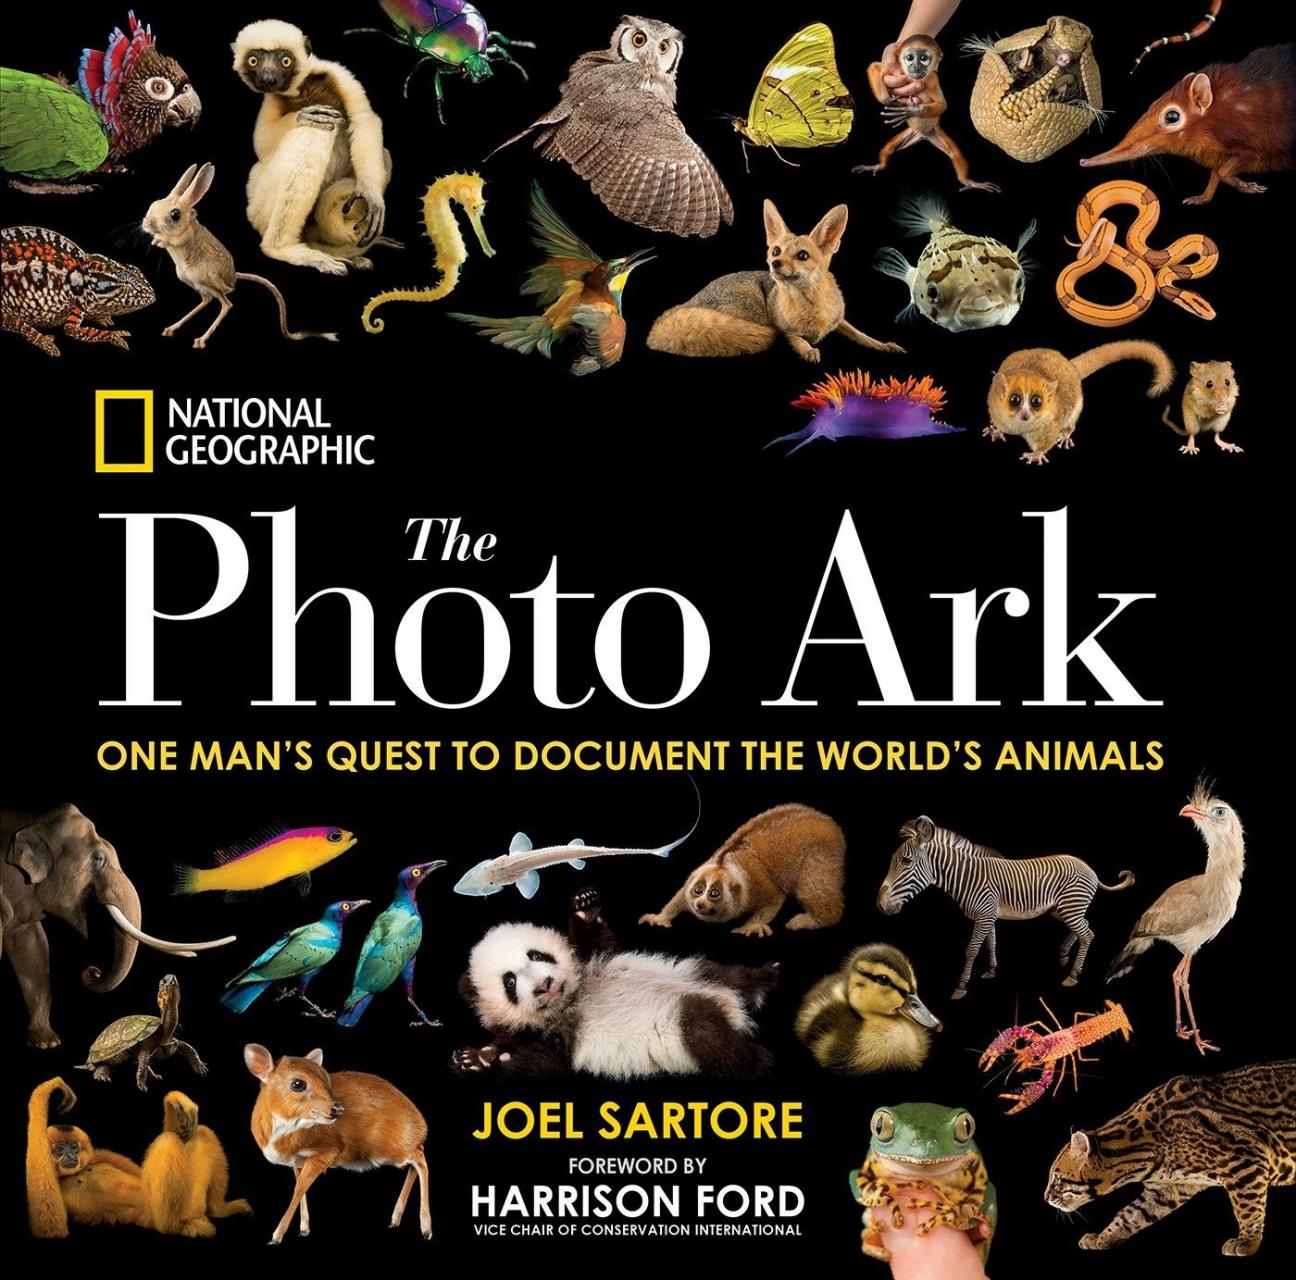 The cover of "The photo Ark" by Joel Sartore, which has a black background filled with photos of animals. The title is in the middle in white